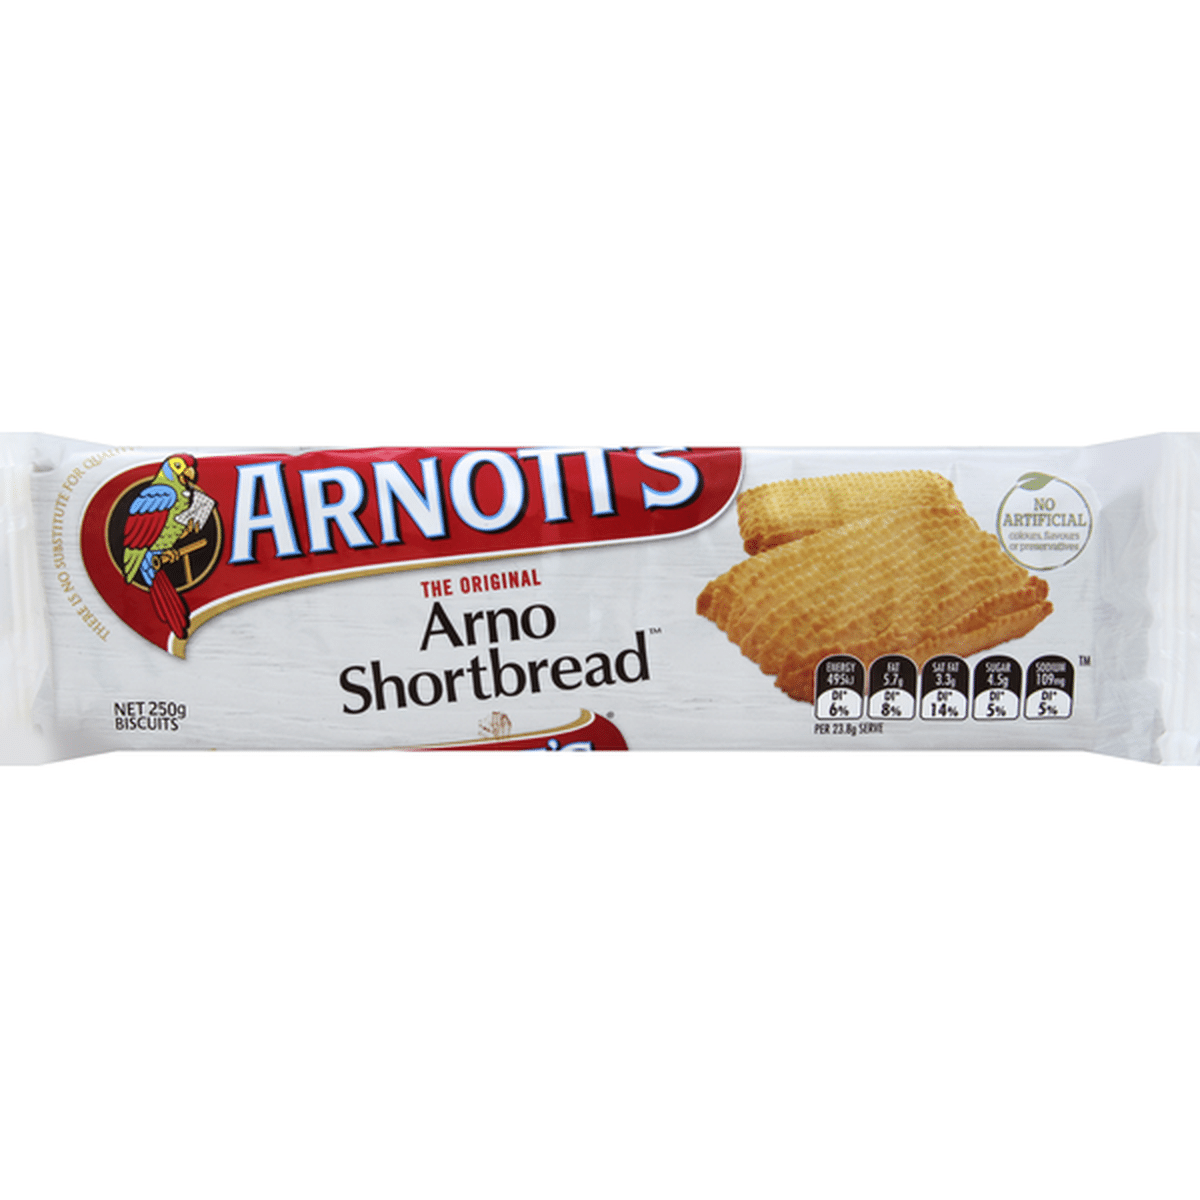 Arnotts Biscuits Arno Shortbread The Original 250 G Delivery Or Pickup Near Me Instacart 7188